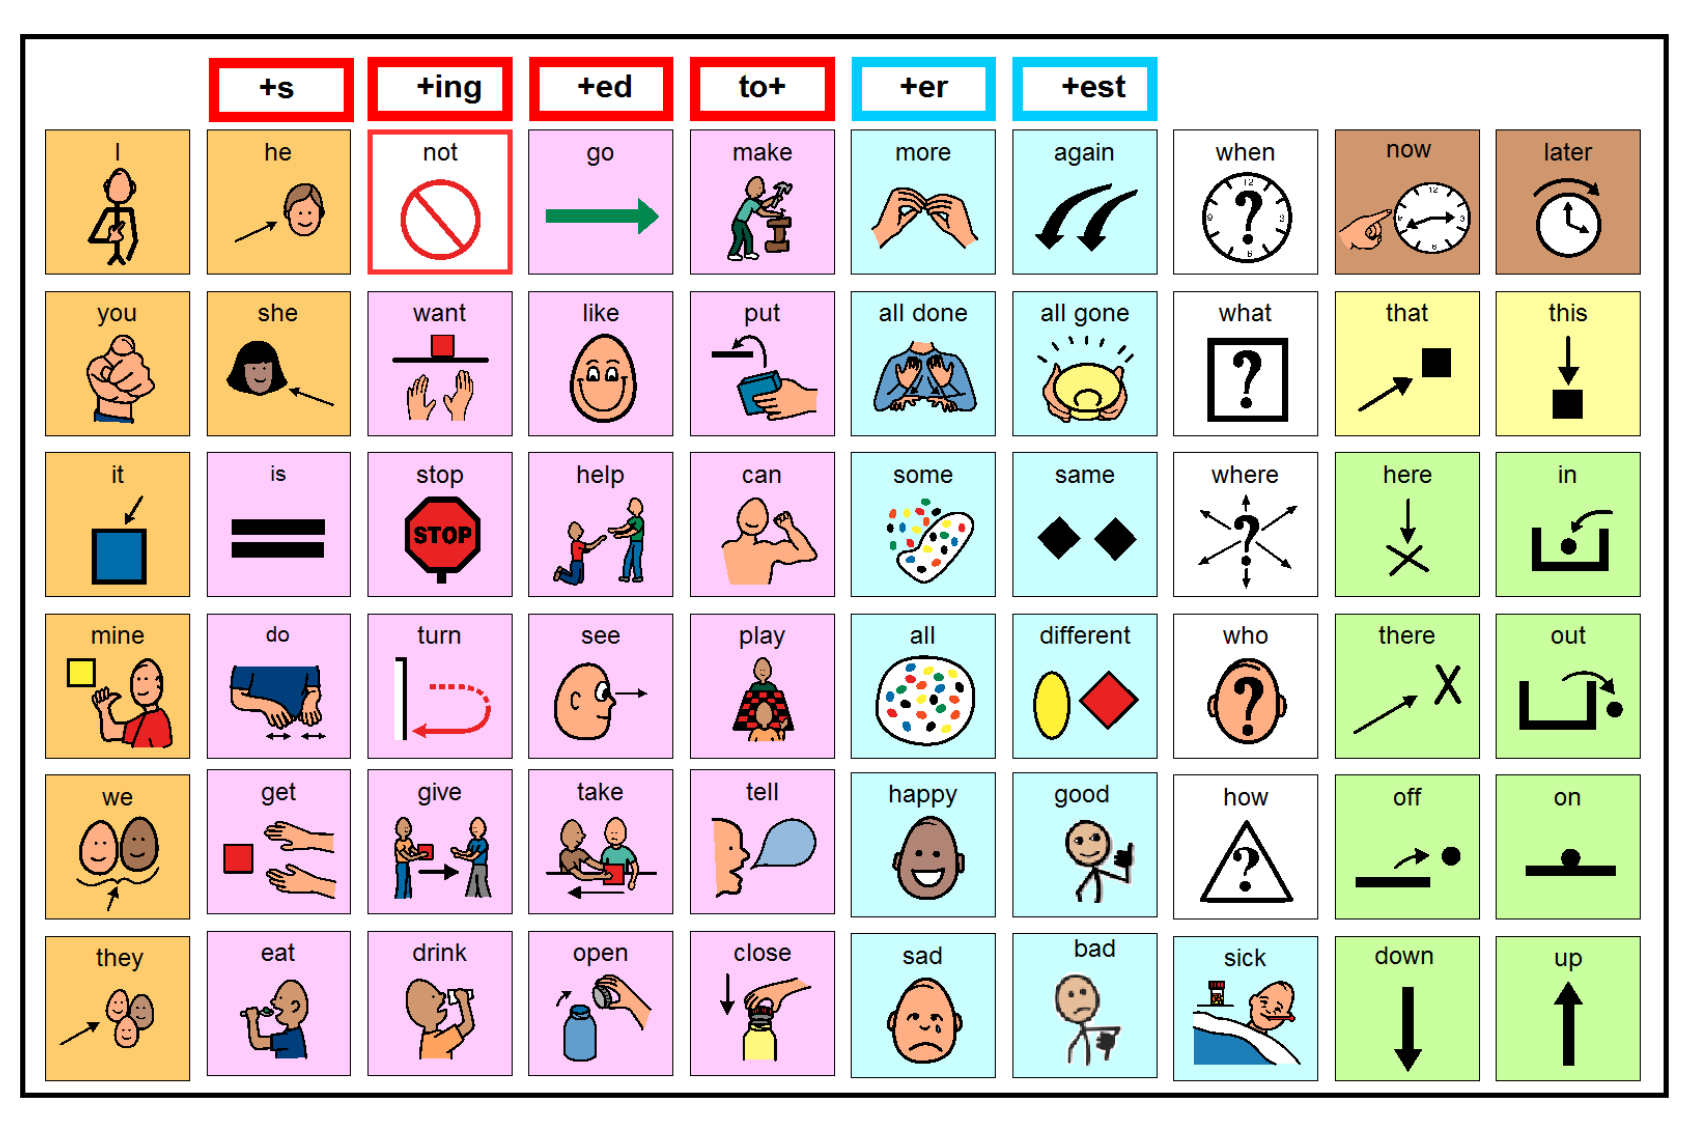 MISD core 60 board with symbols and labels for 60 core words and some early morphemes. Words are color-coded.